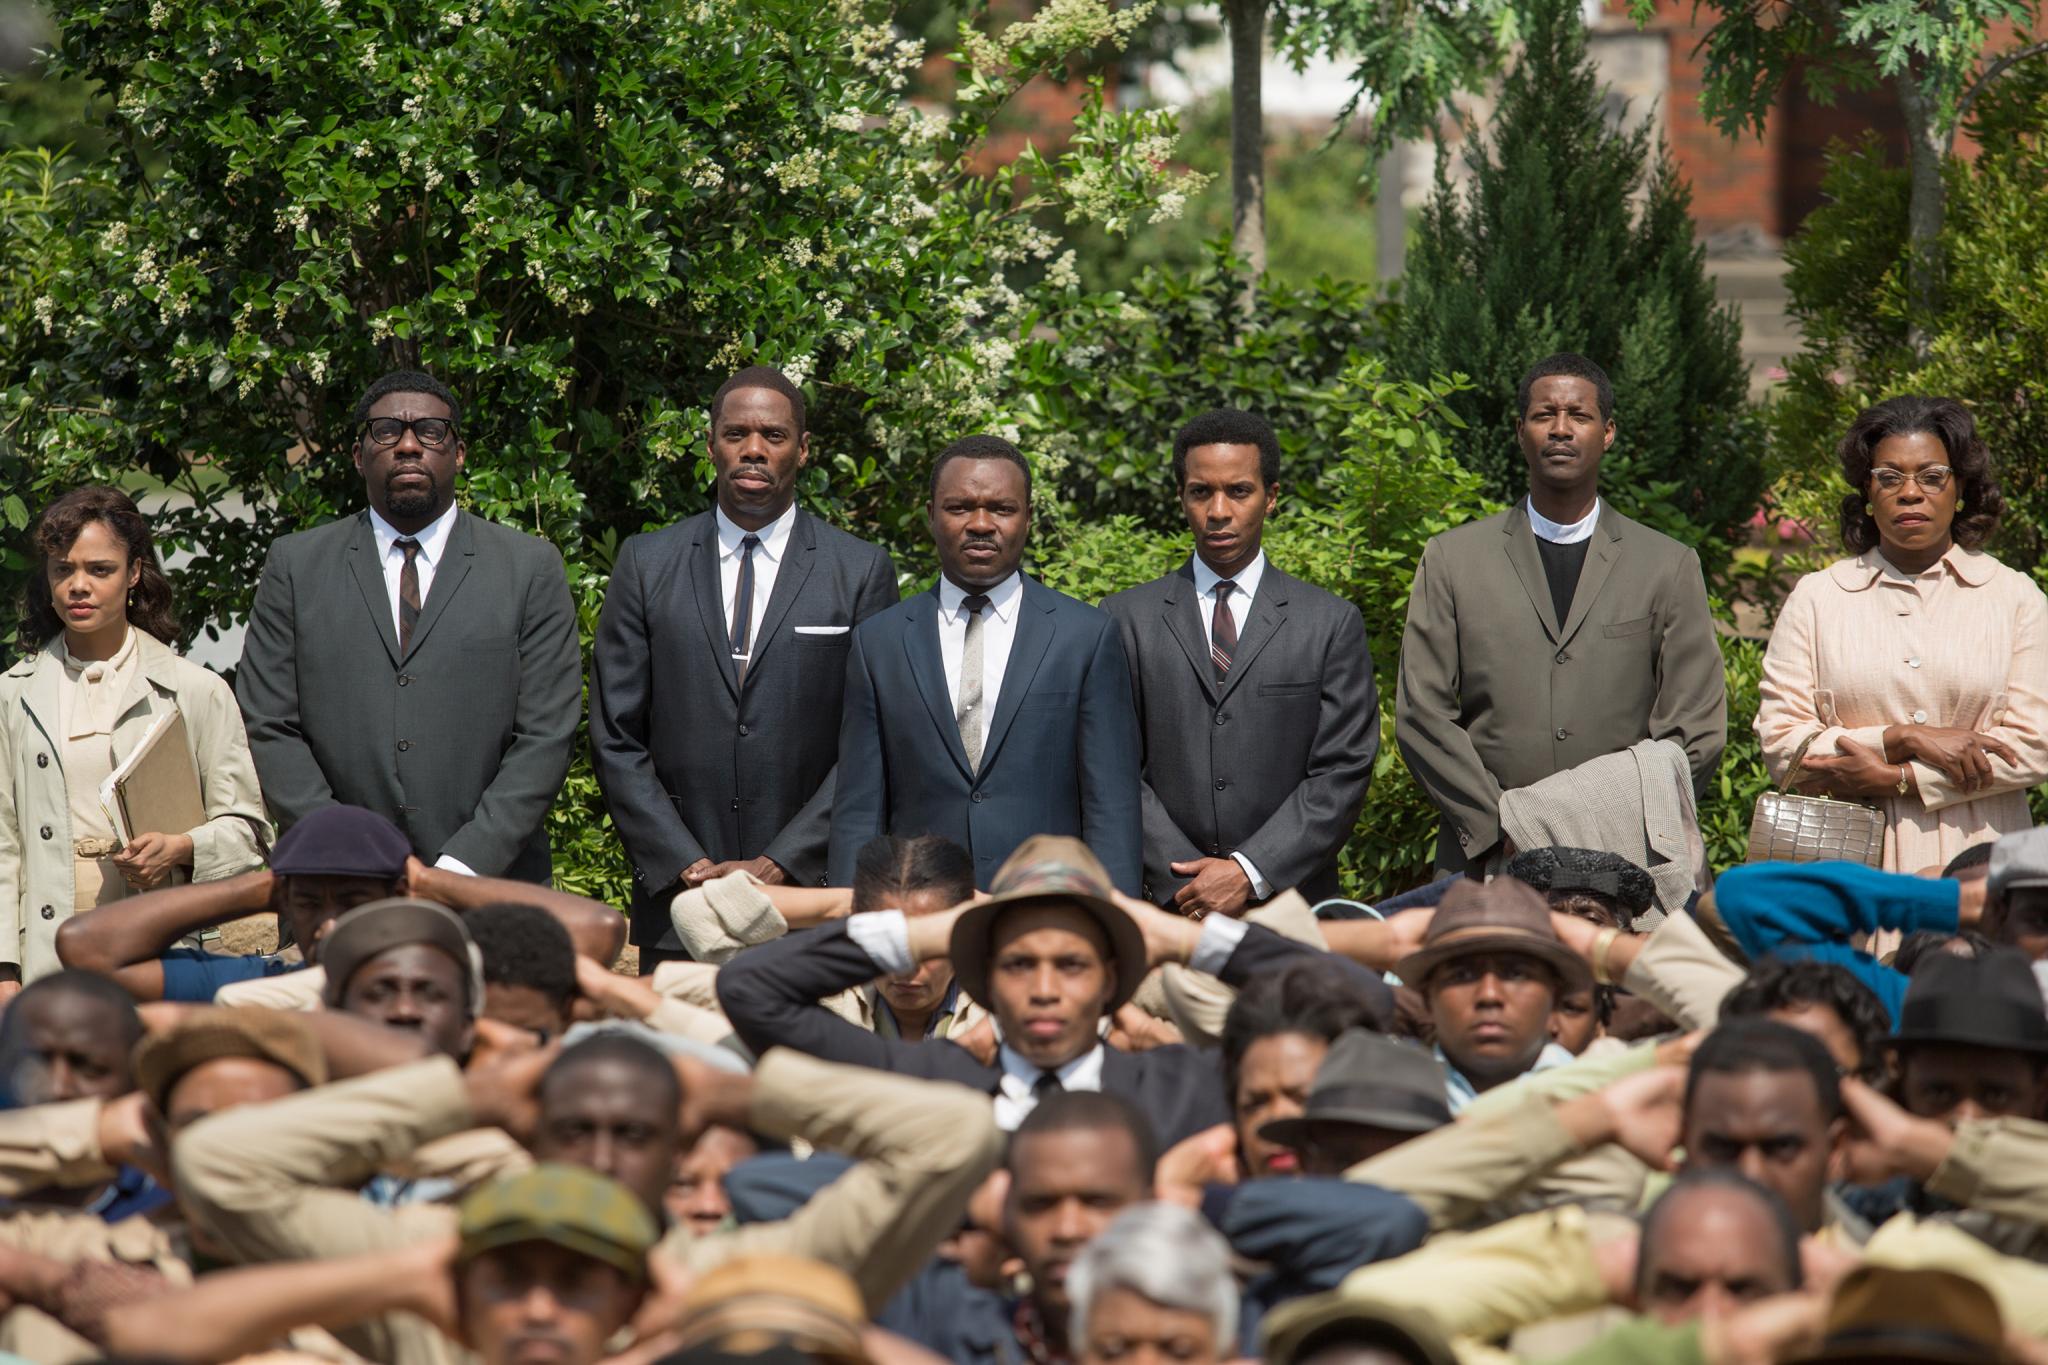 'Selma' Named Top Film of 2014 By African-American Film Critics Association